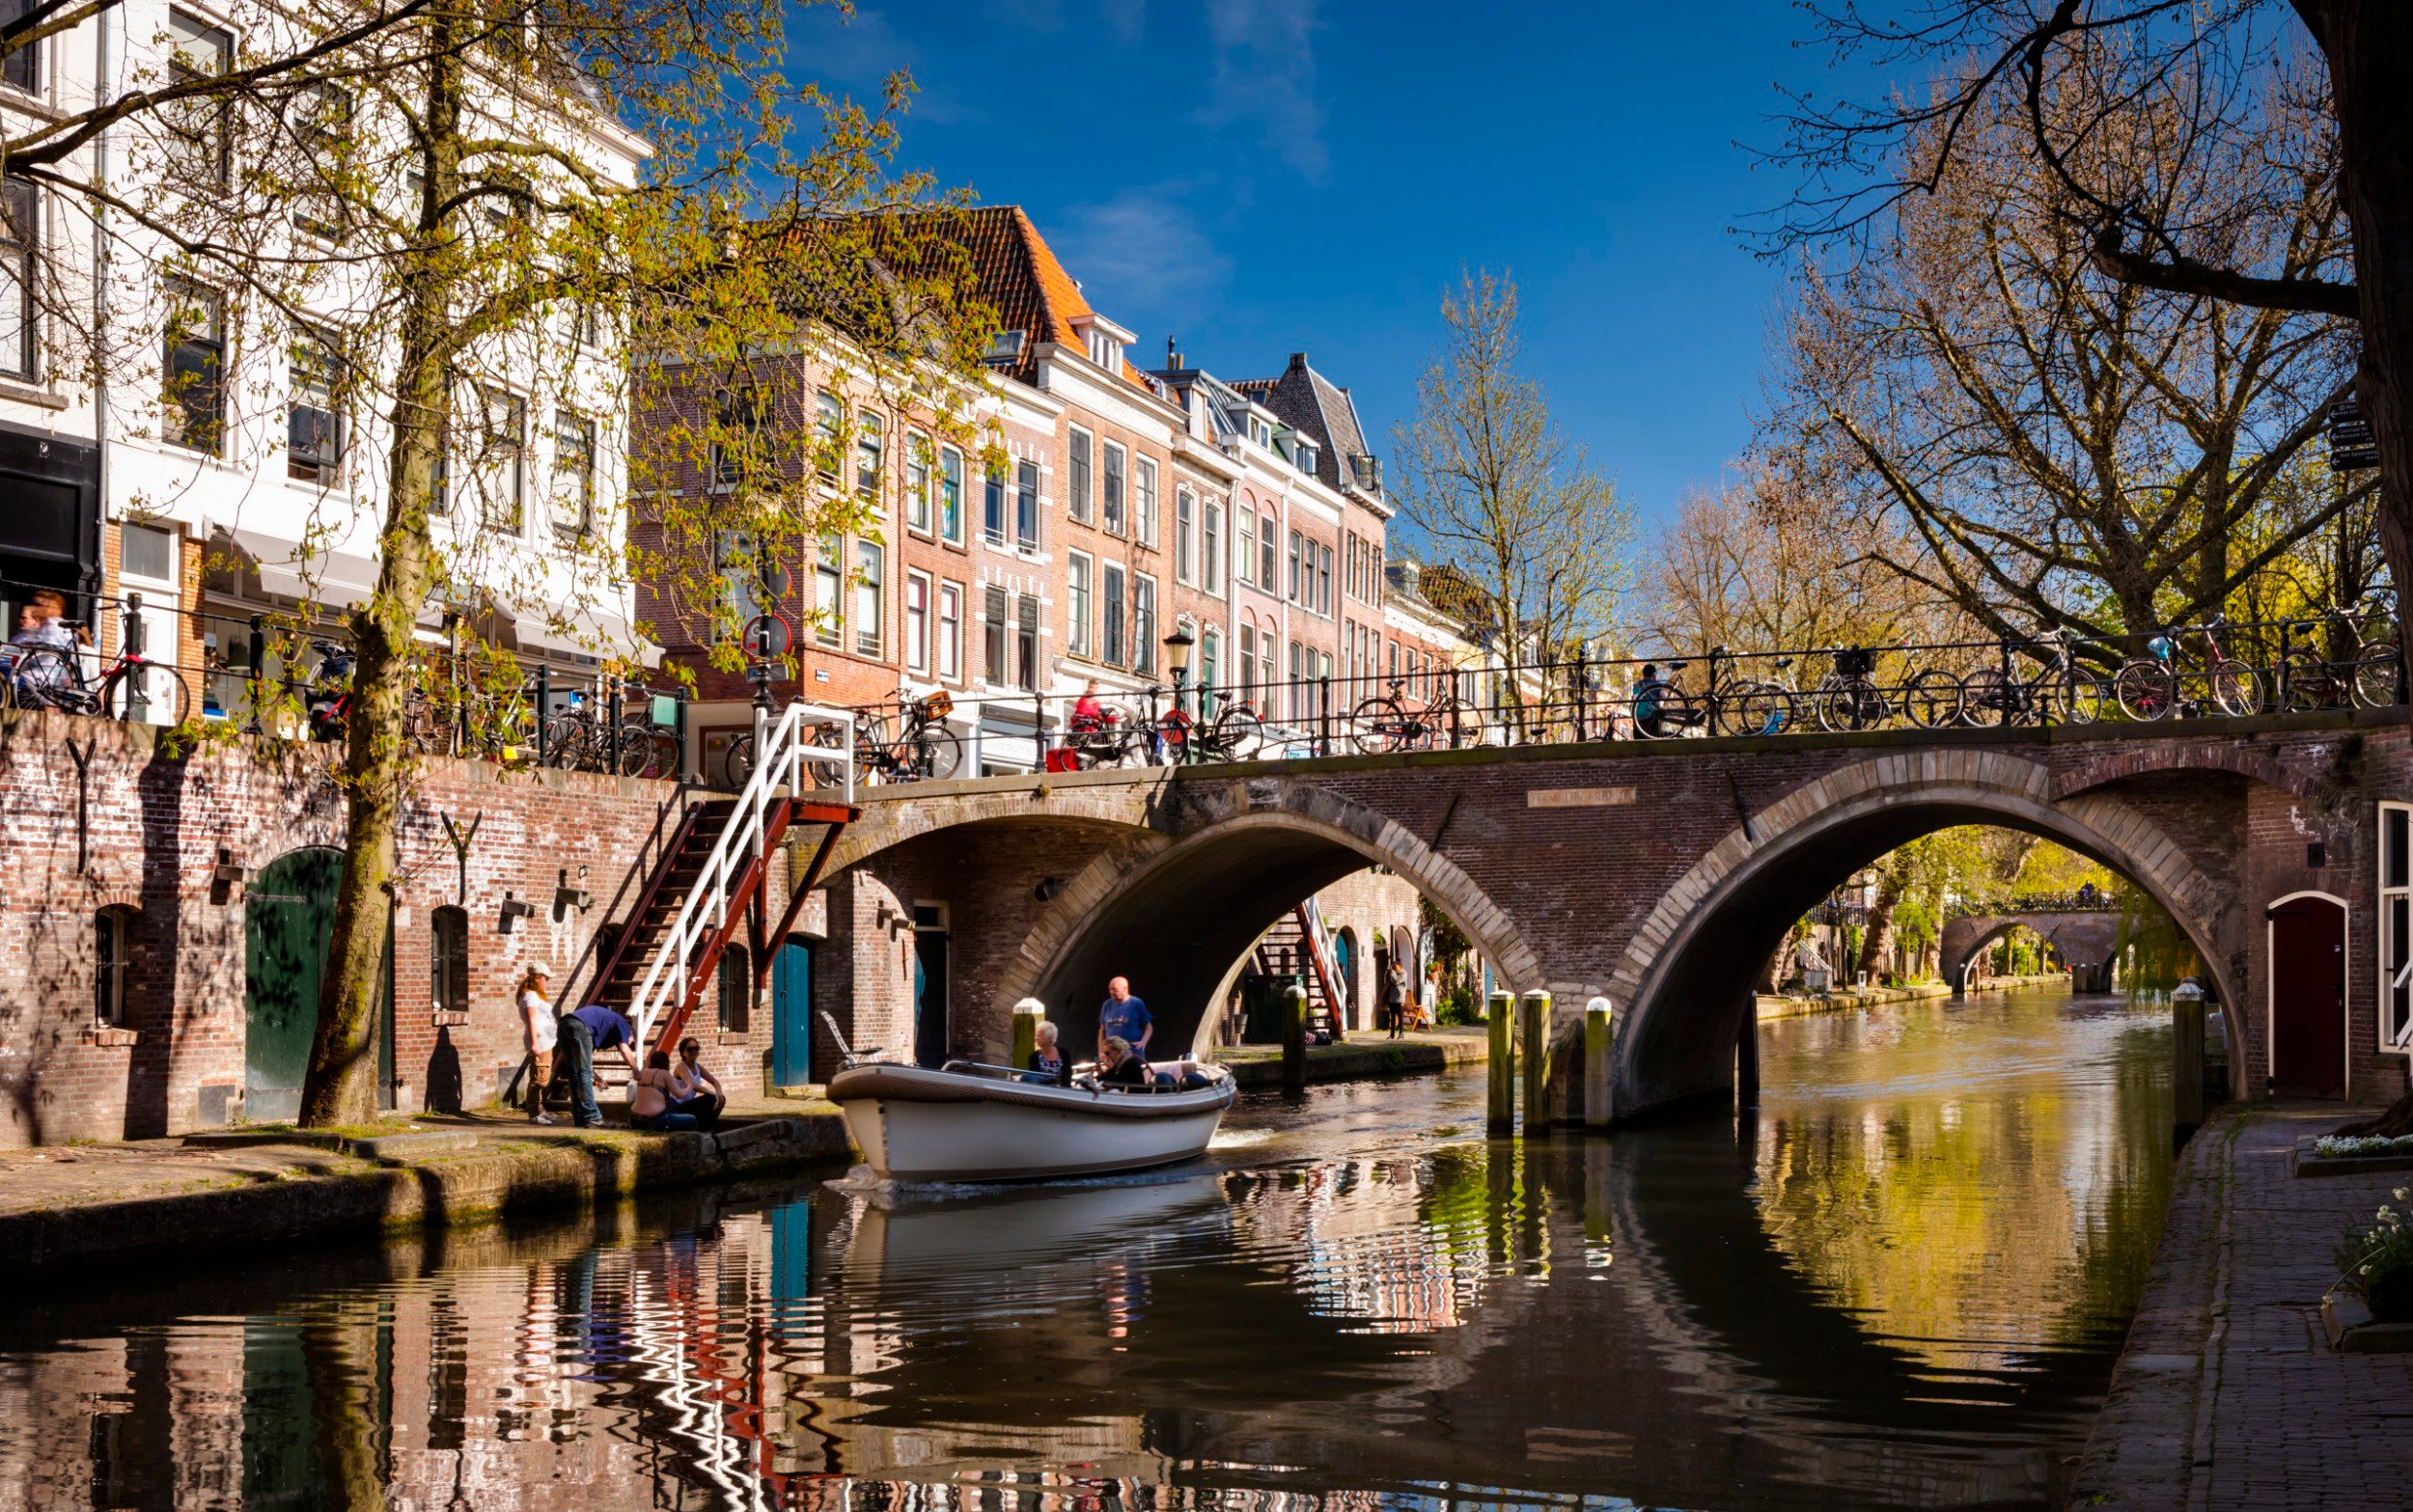 amsterdam doesn’t want any more tourists – so here are 10 alternatives